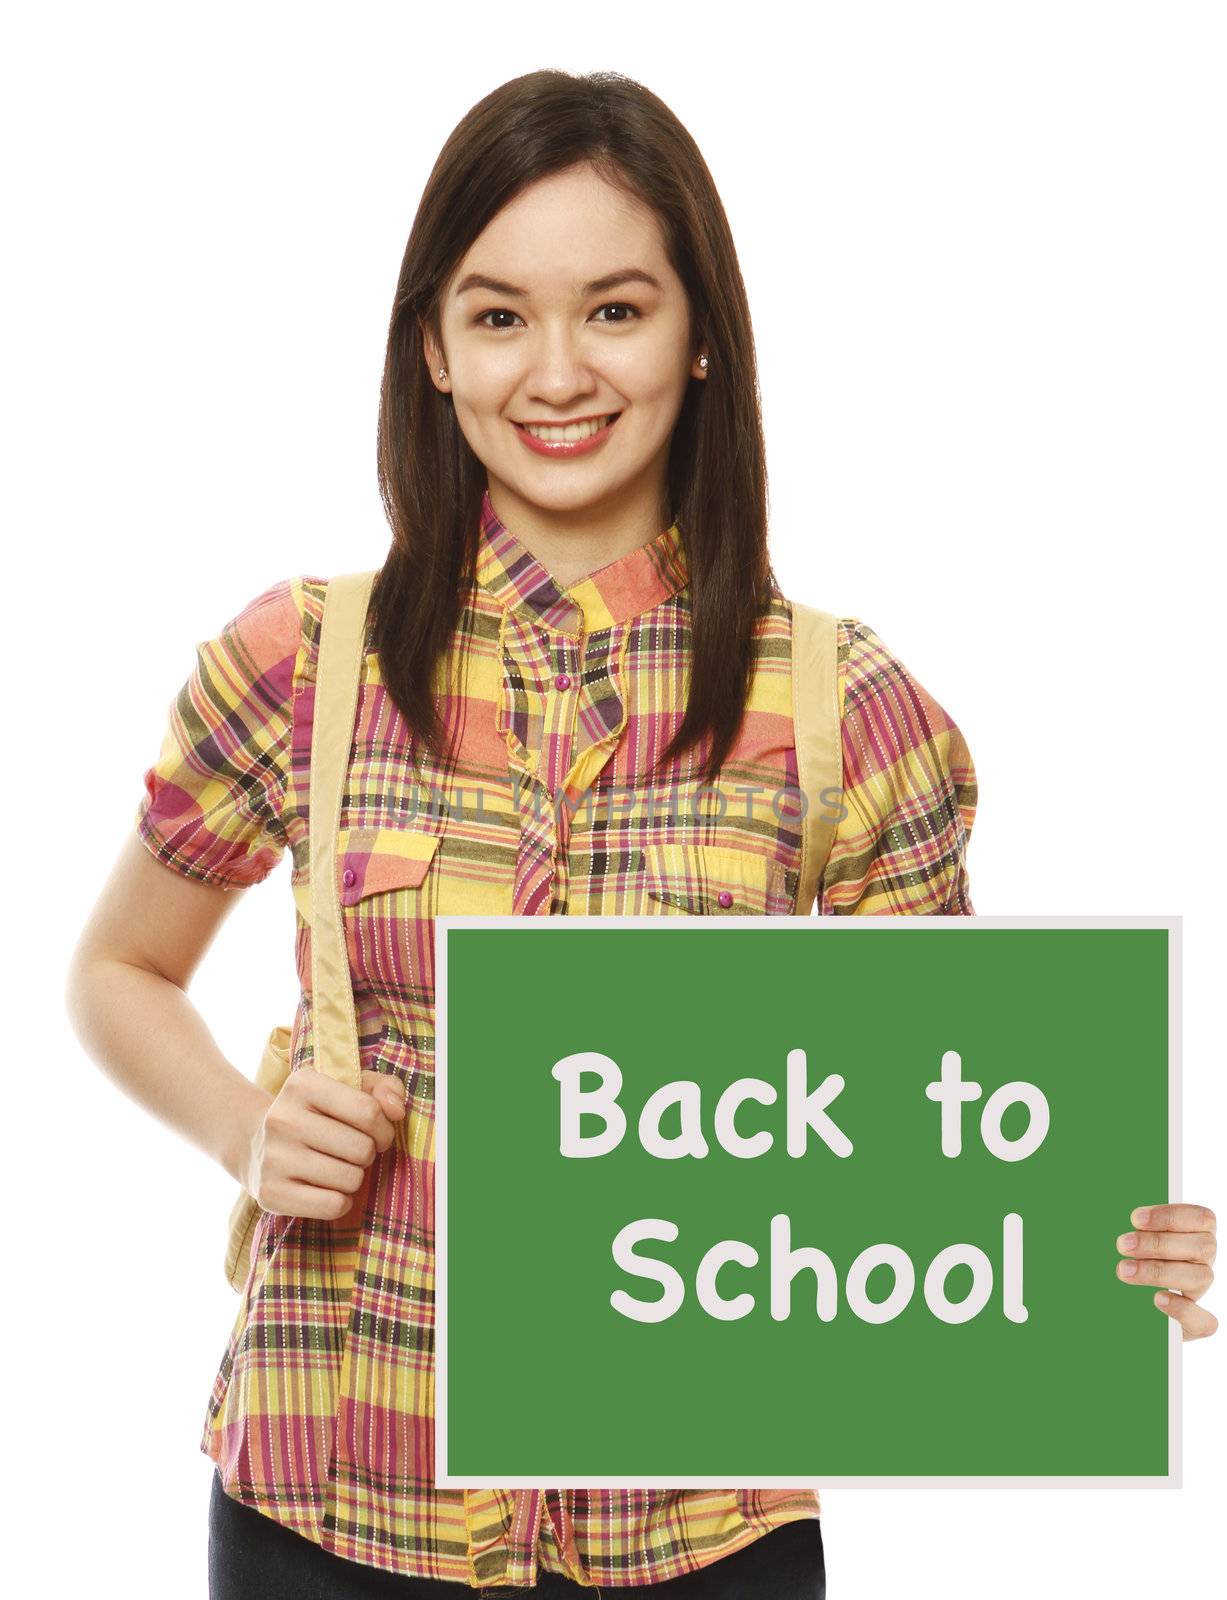 A university student holding a Back To School signboard